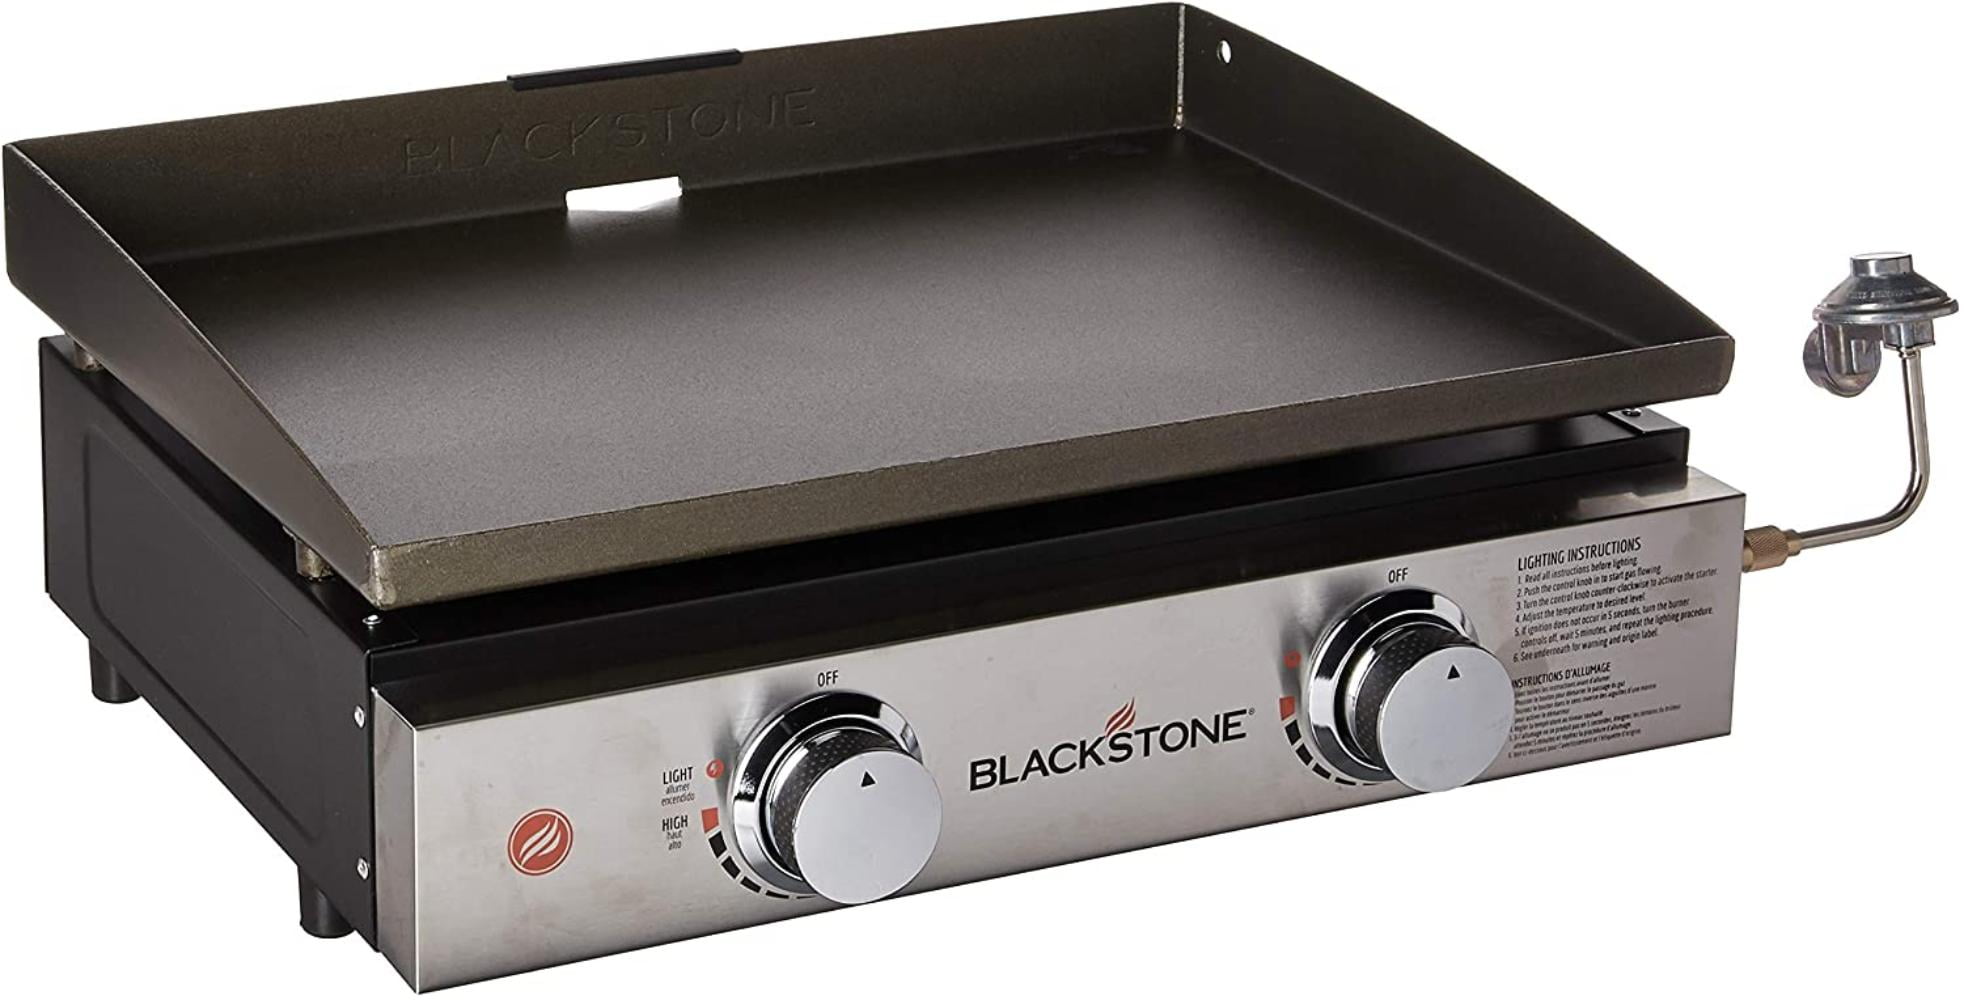 Outdoor Gas Grill Flat Top 2 Burner Portable Griddle Propane Stainless Steel New 